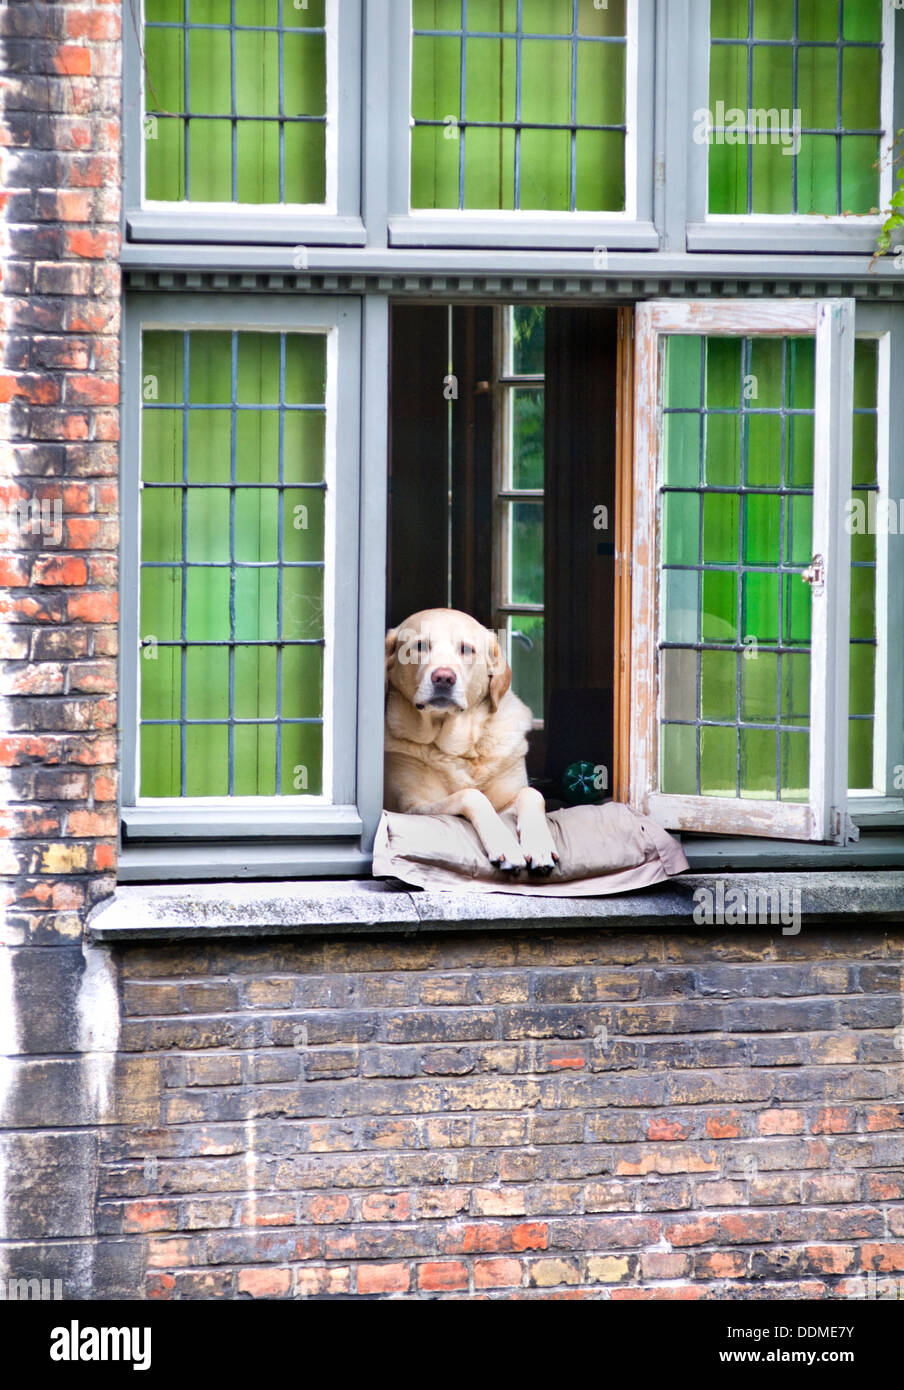 The famous dog in Bruges, Belgium, who spends his day watching tourist boats pass by on the canal below Stock Photo